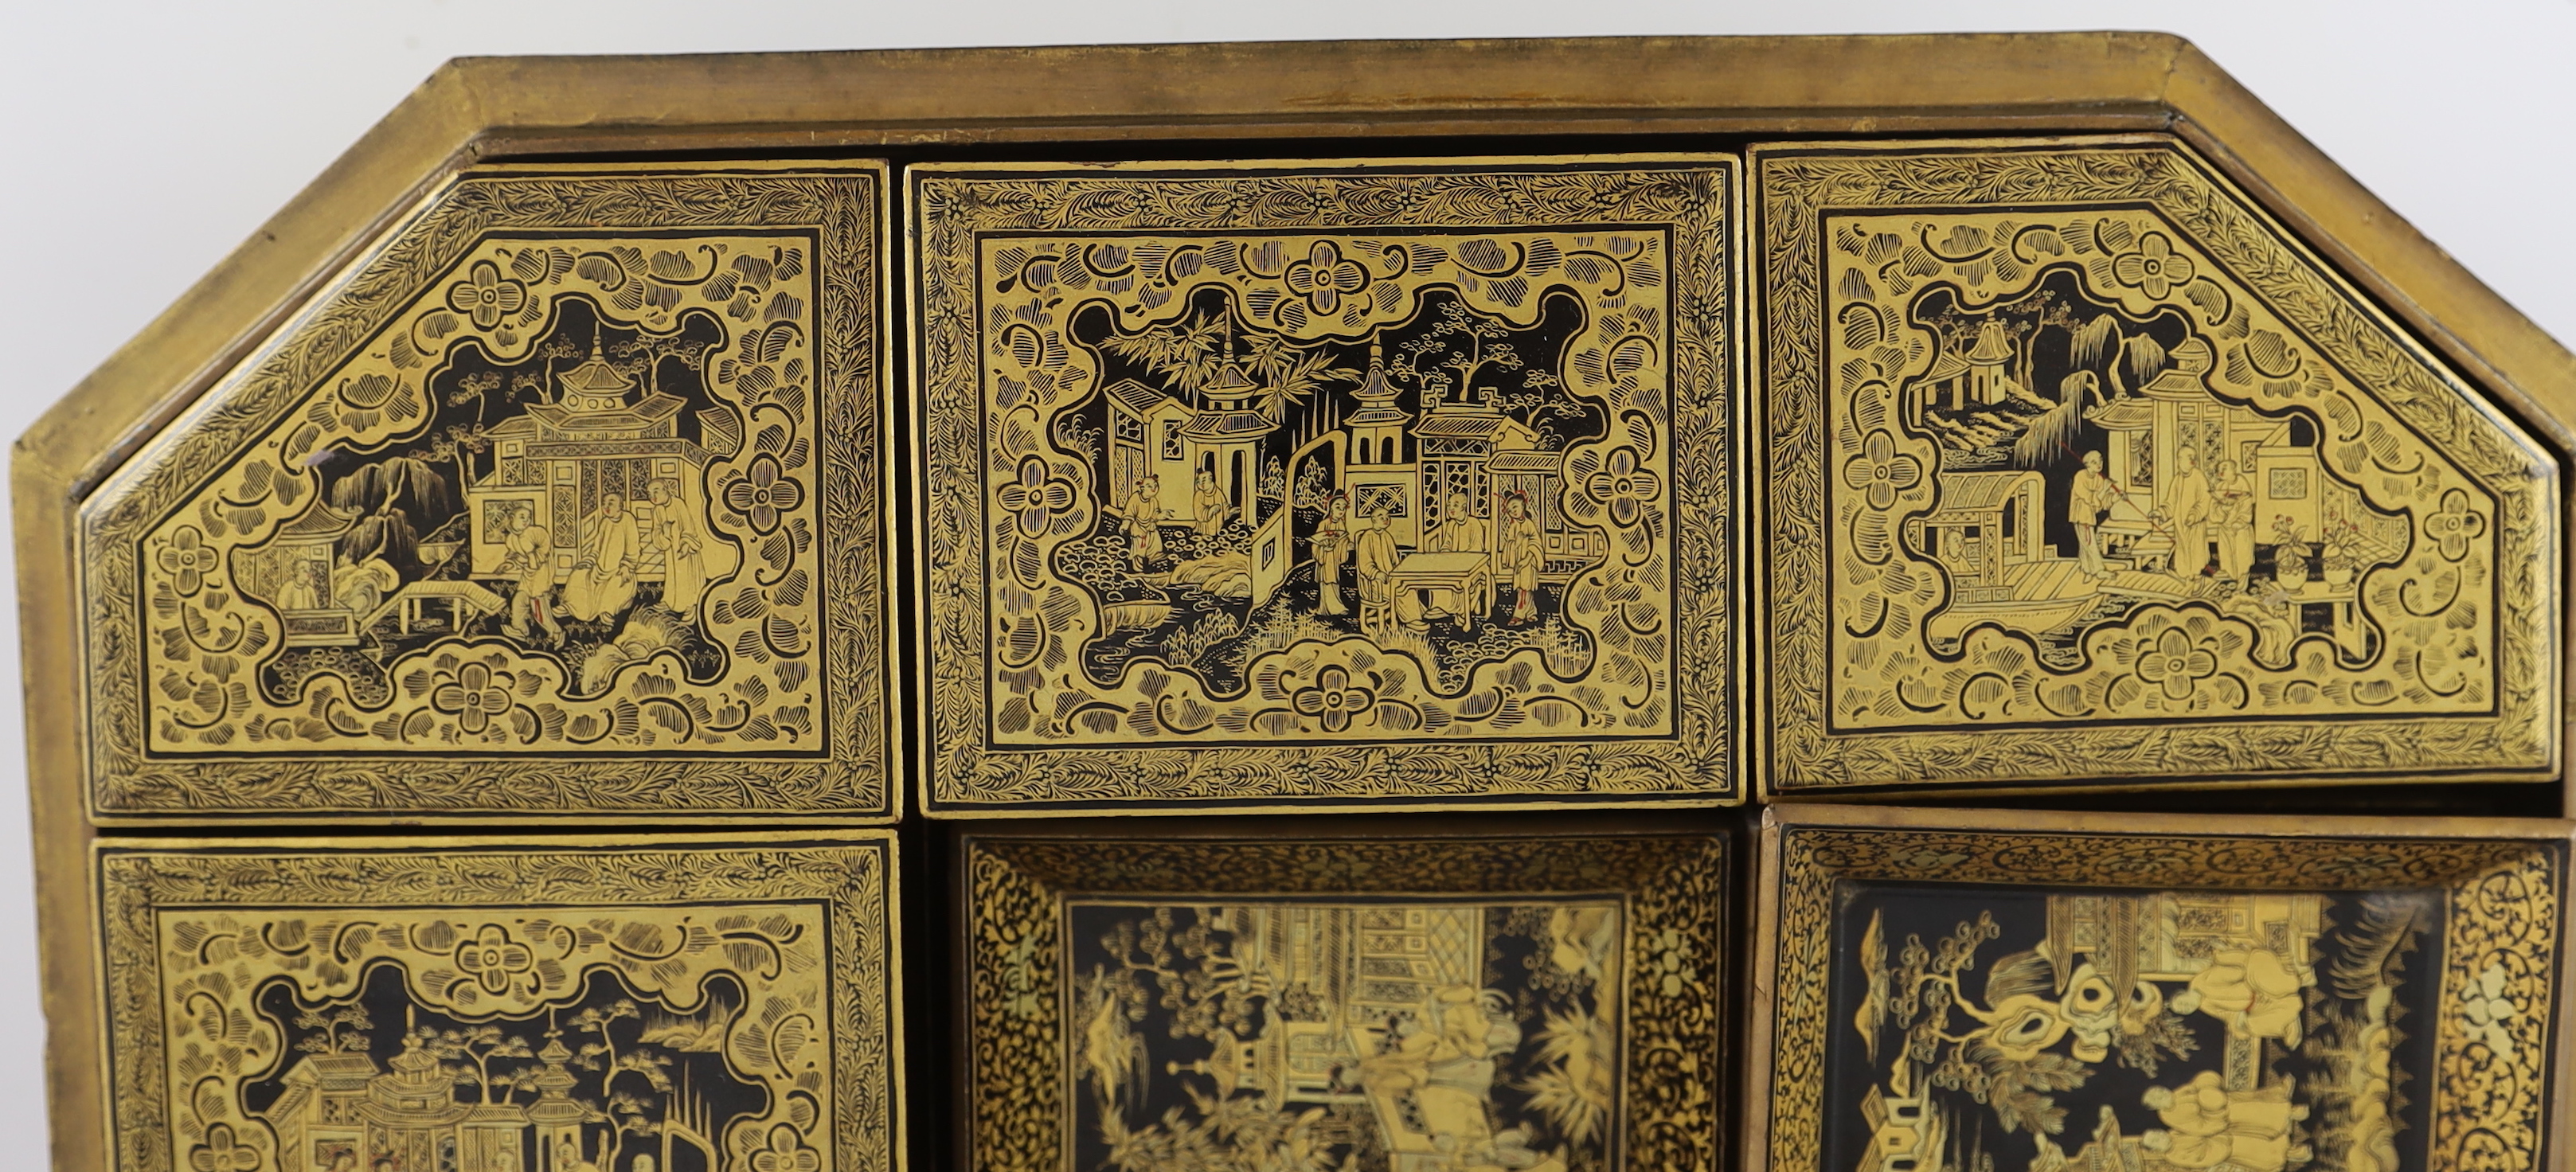 A Chinese Export gilt-decorated black lacquer games box, c.1830, decorated with figures amid - Image 6 of 7